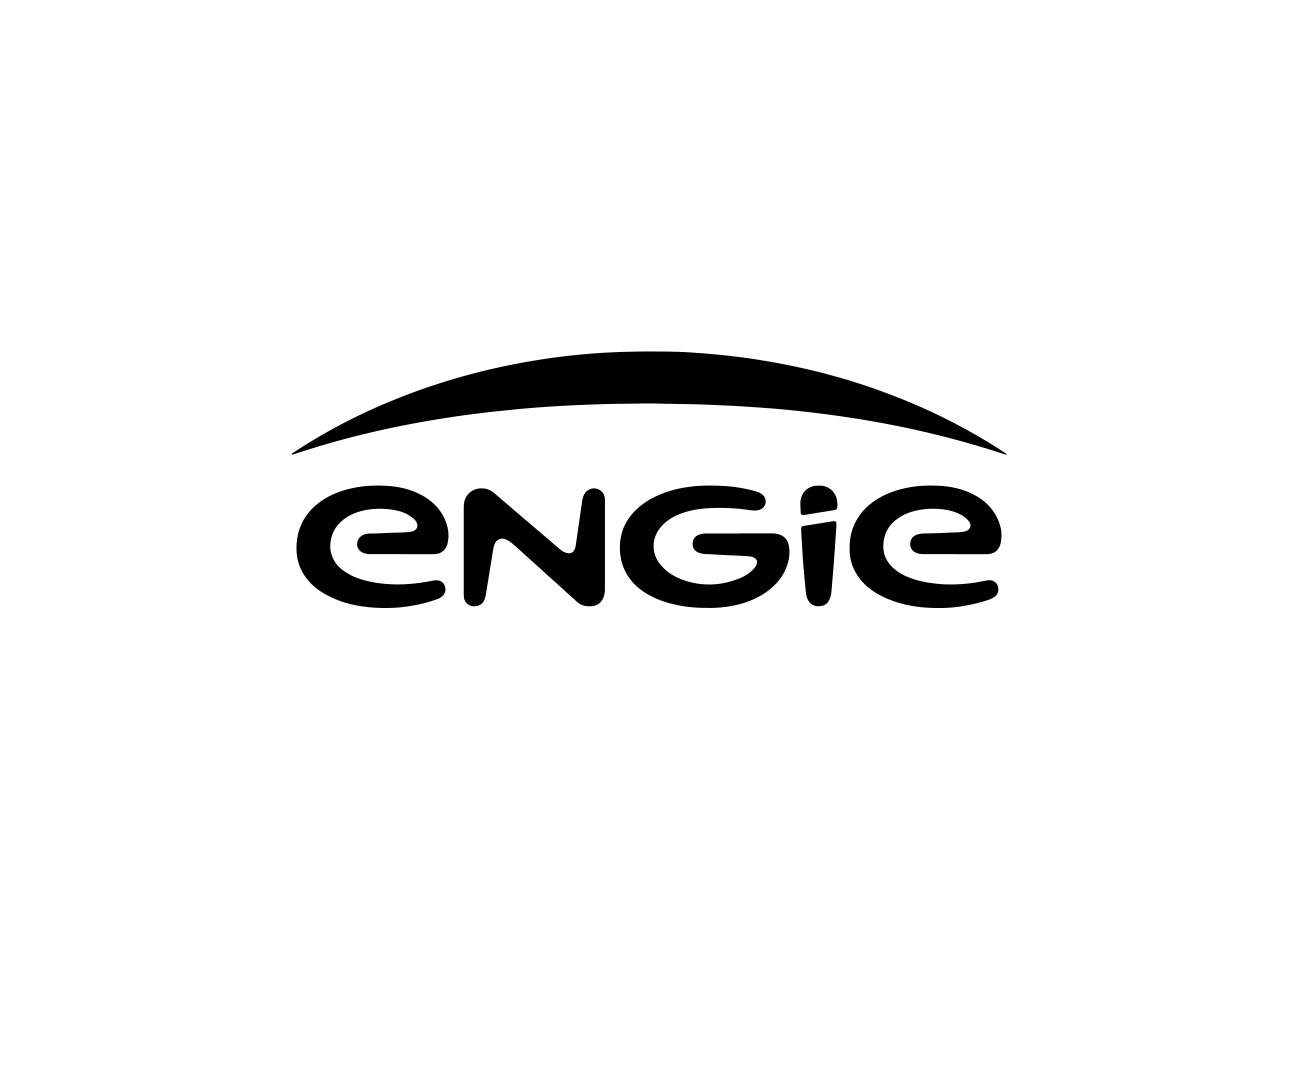 Engie energy Logo consulting